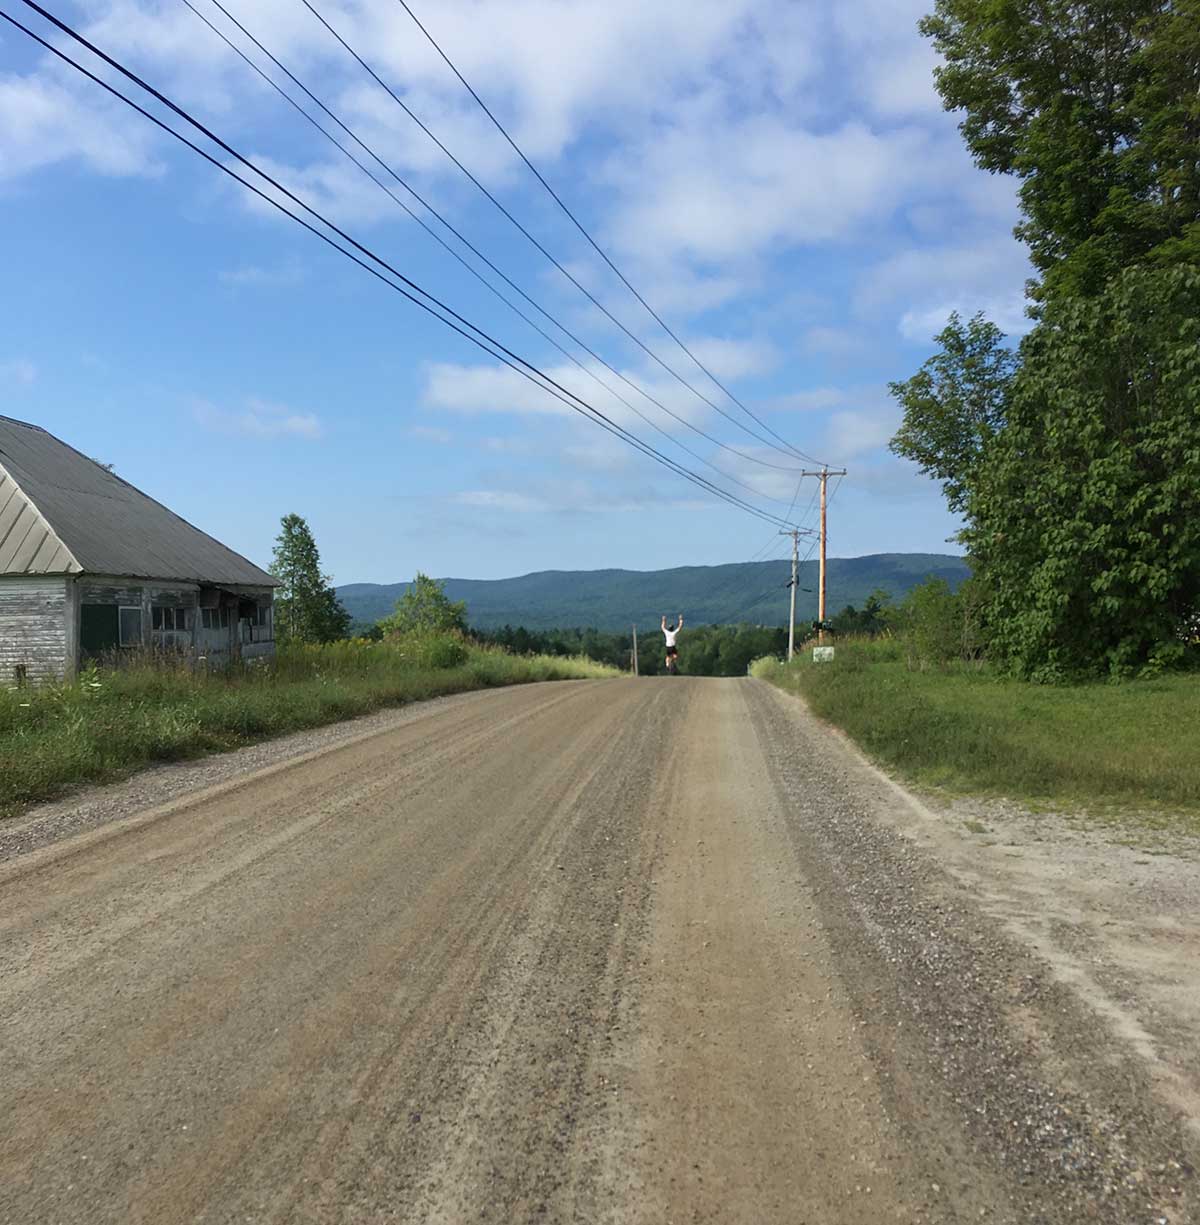 ride review of ted king rooted vermont gravel bike ride and race